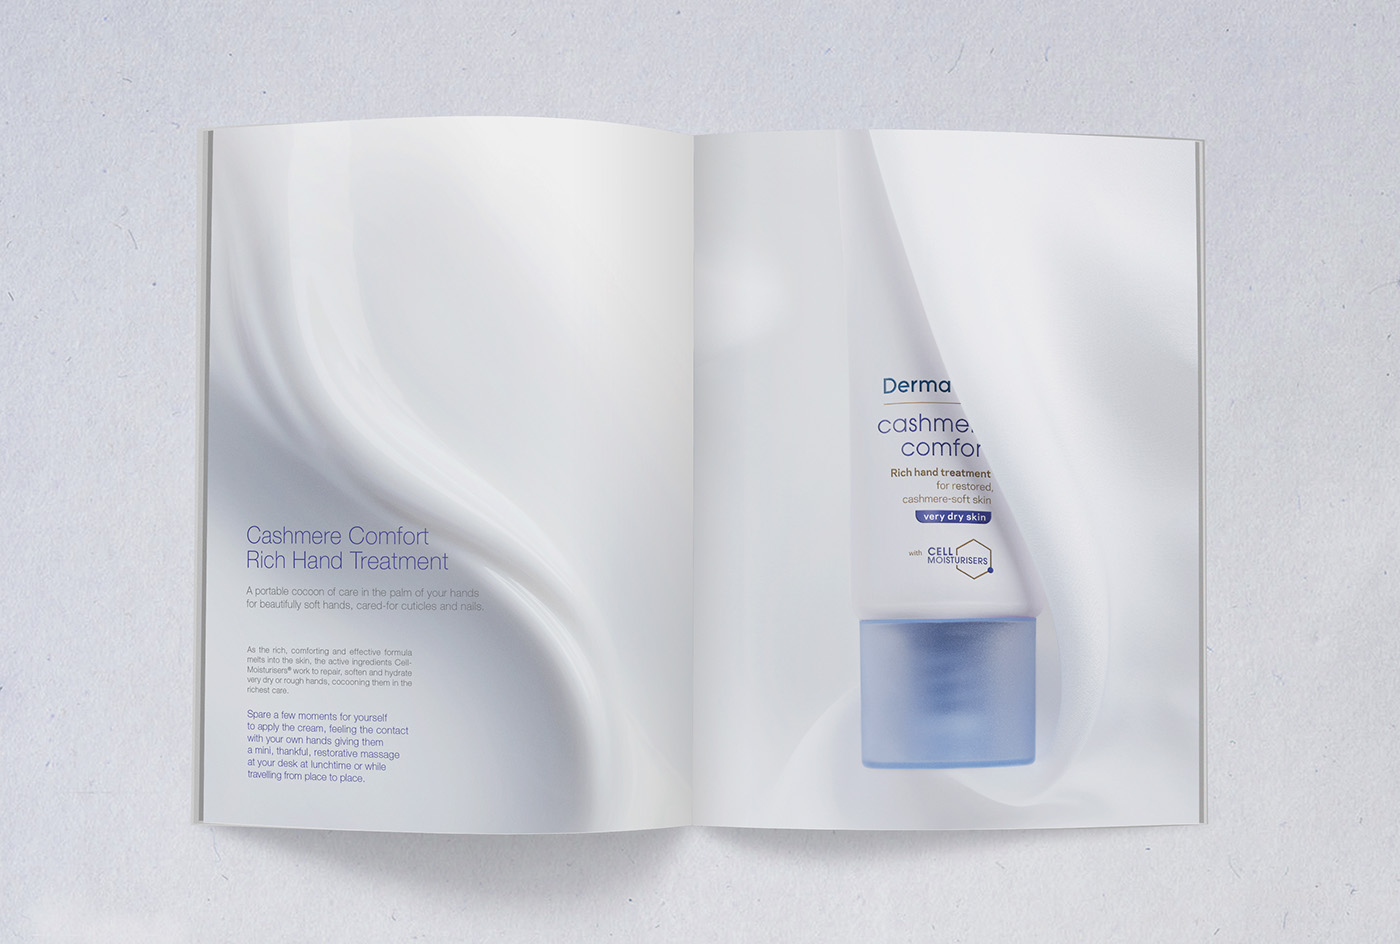 press release Press Dossier brochure Booklet cosmetics dove texture Layout fabric edition